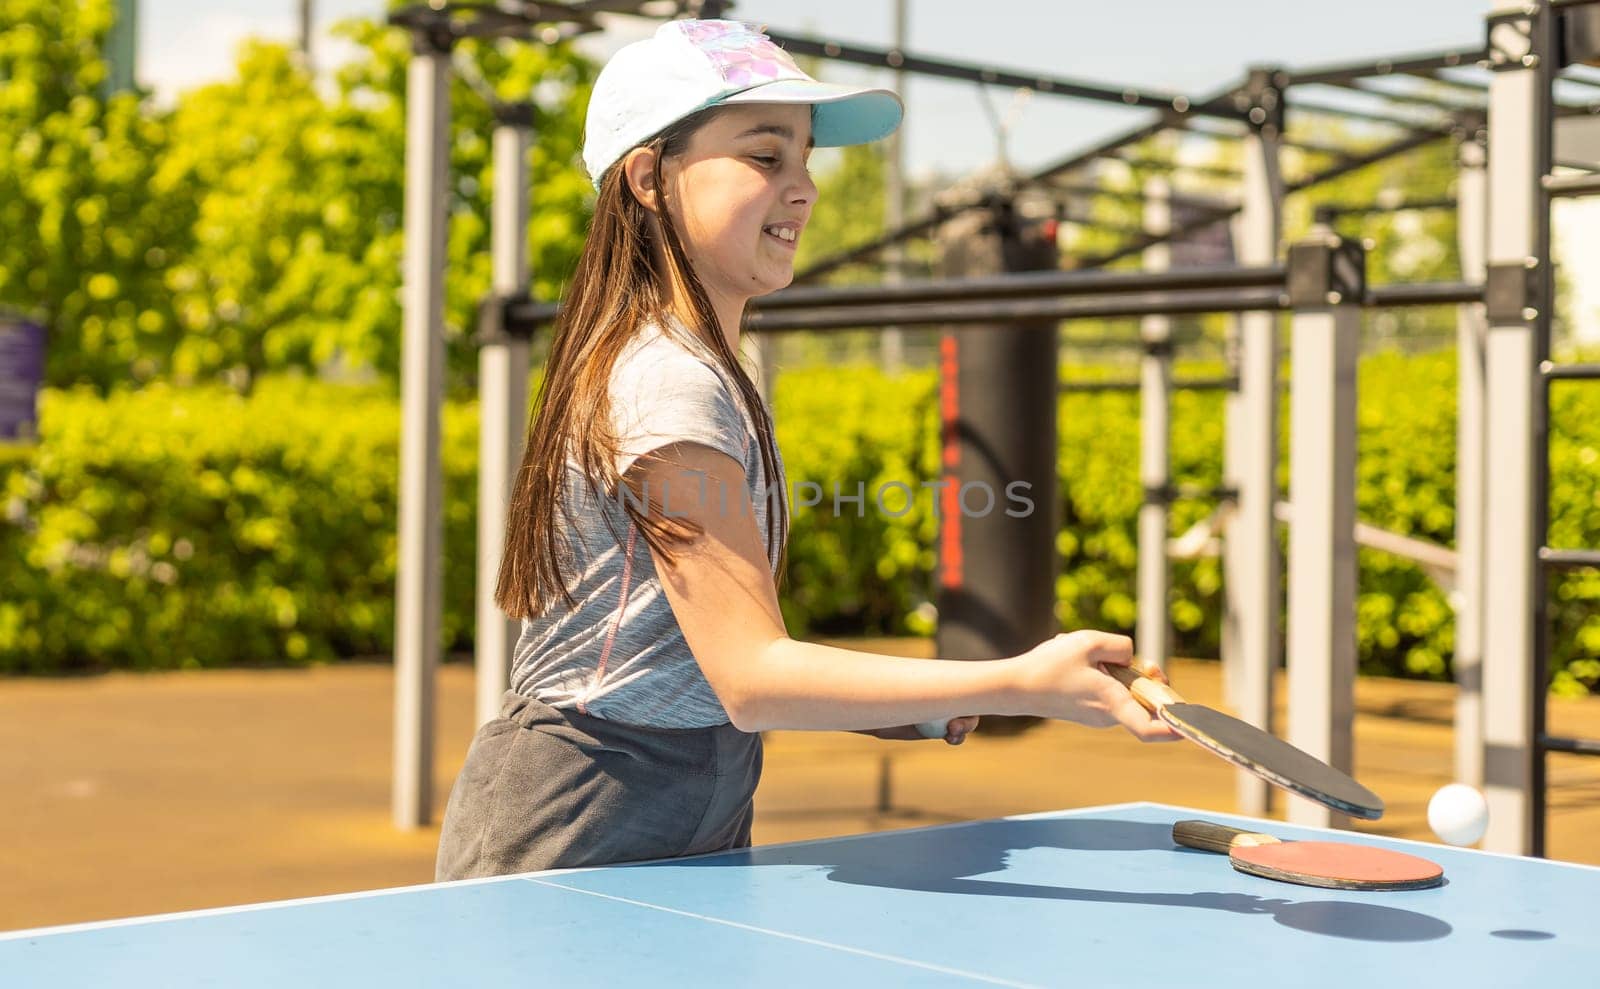 Little girl playing ping pong in park.